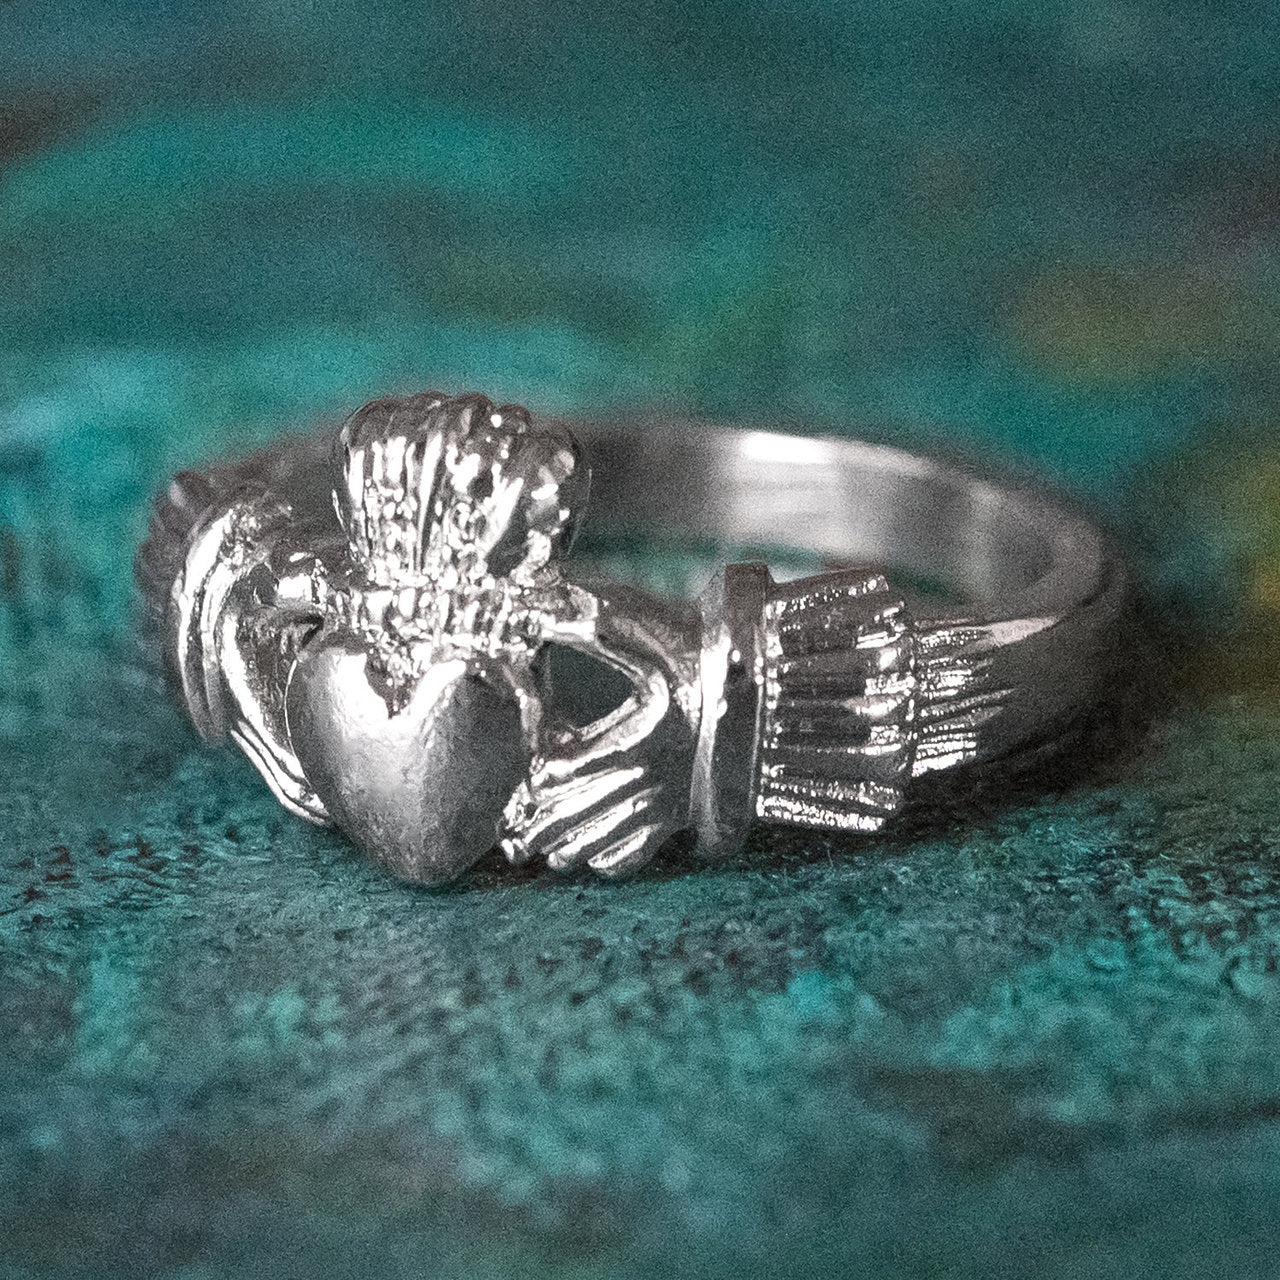 Handcrafted Vintage 18kt White Gold Electroplated Irish Claddagh Ring Made in USA Size: 7